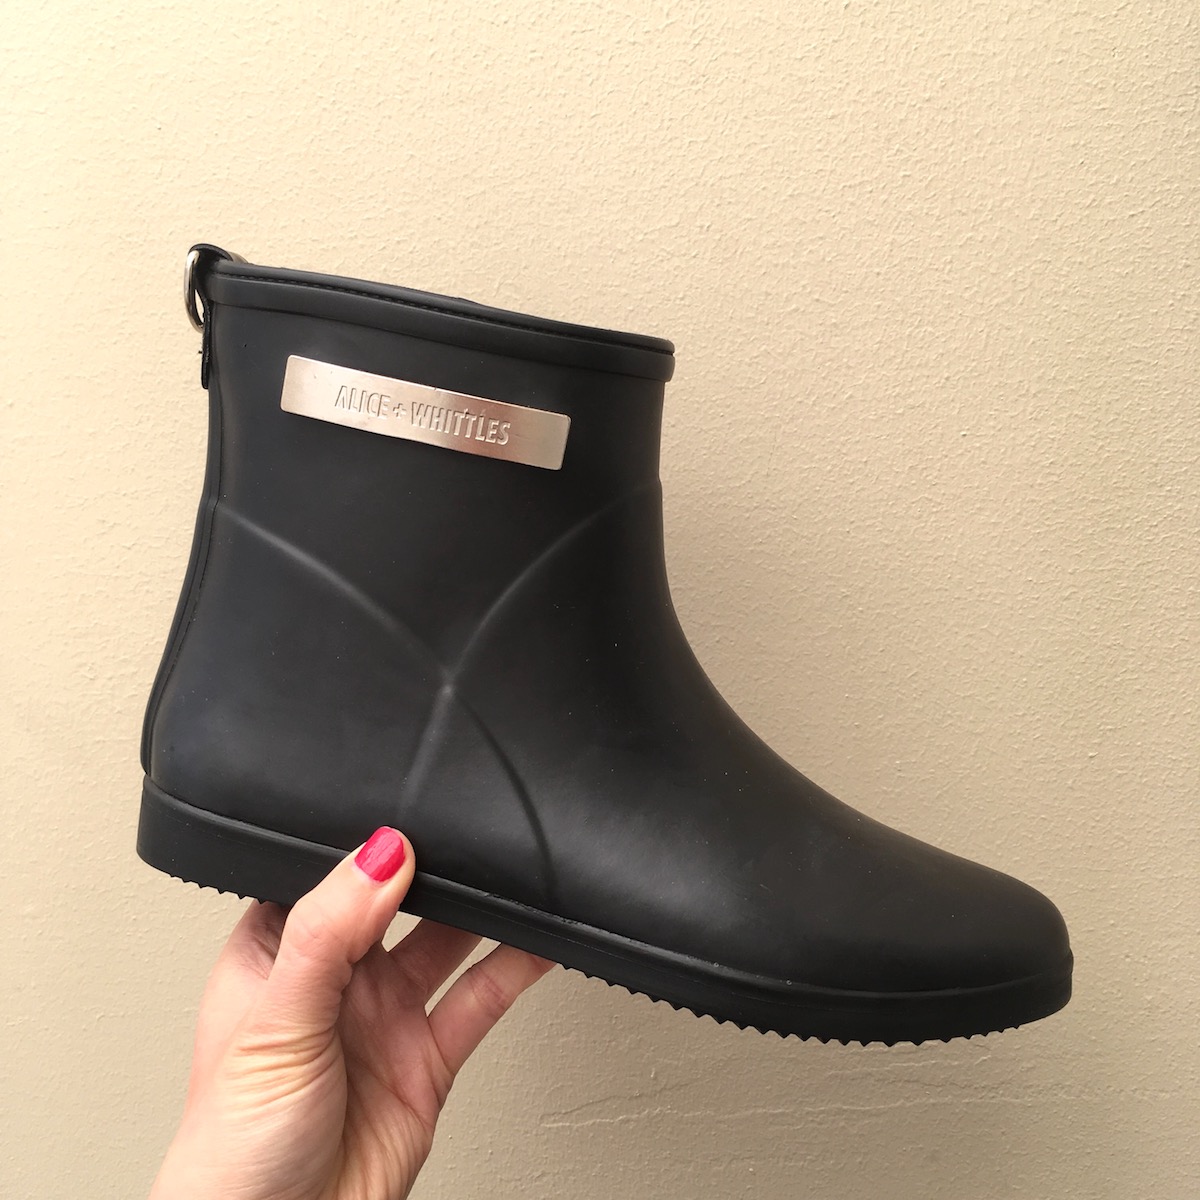 Alice + Whittles ethical rain boot review: A hand with red nail polish holds up a black rain boot. There is a metal plate at the top of the boot, which reads, "Alice + Whittles"